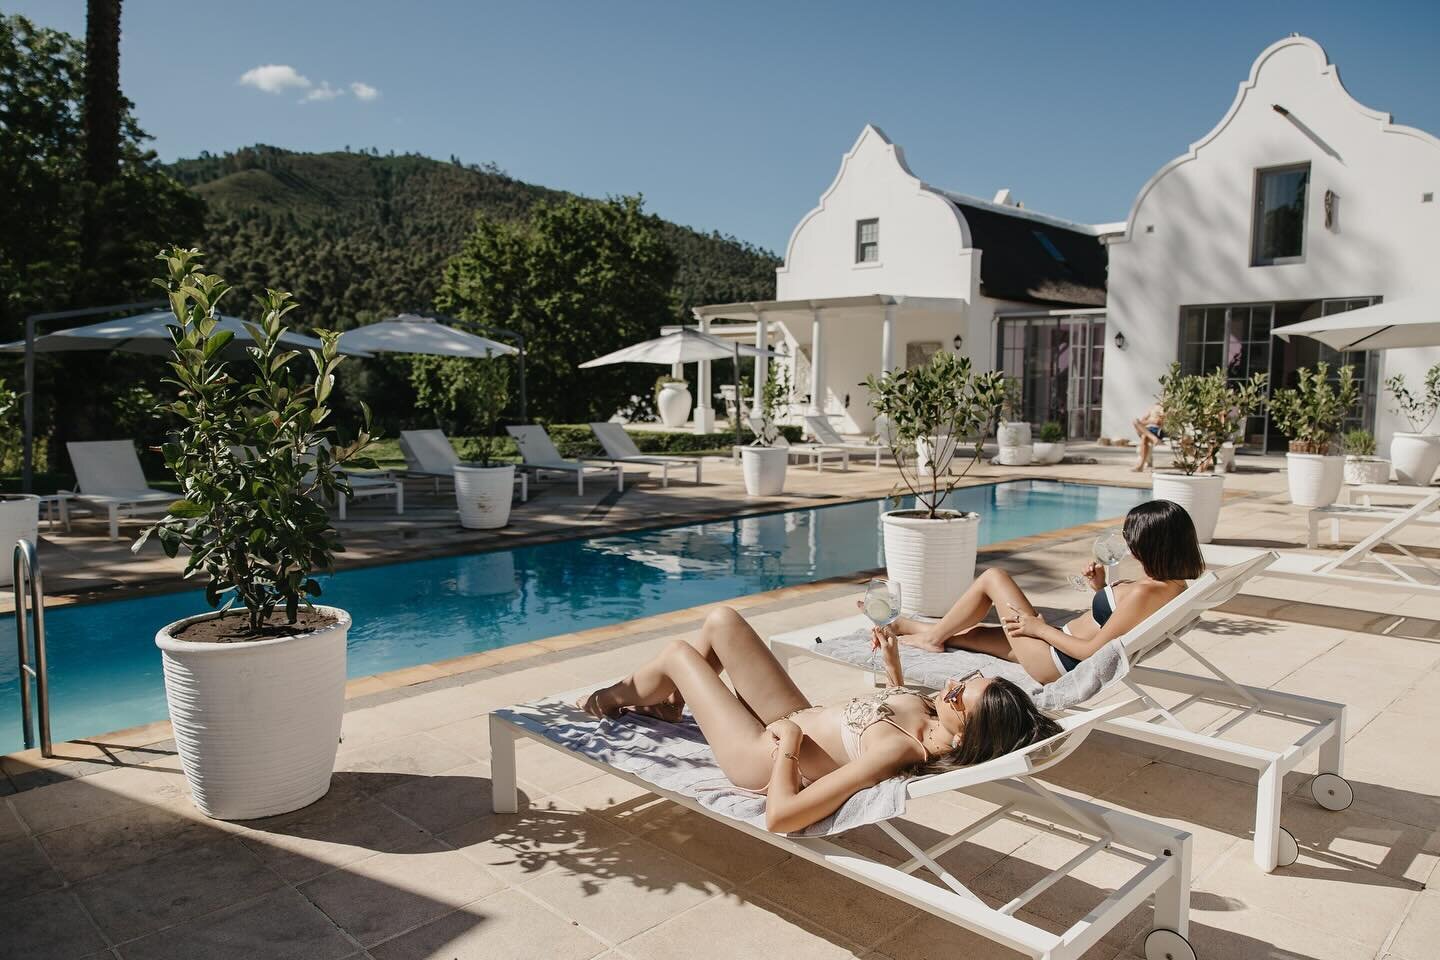 Nothing feels better than lounging by the pool at @thedoolhof &amp; watching the clouds twirl through the mountain ranges above!

For enquiry&rsquo;s, email info@doolhofboutiquehotel.co.za 
Or Call us 021 873 4089

#thedoolhof #doolhofwineestate #doo